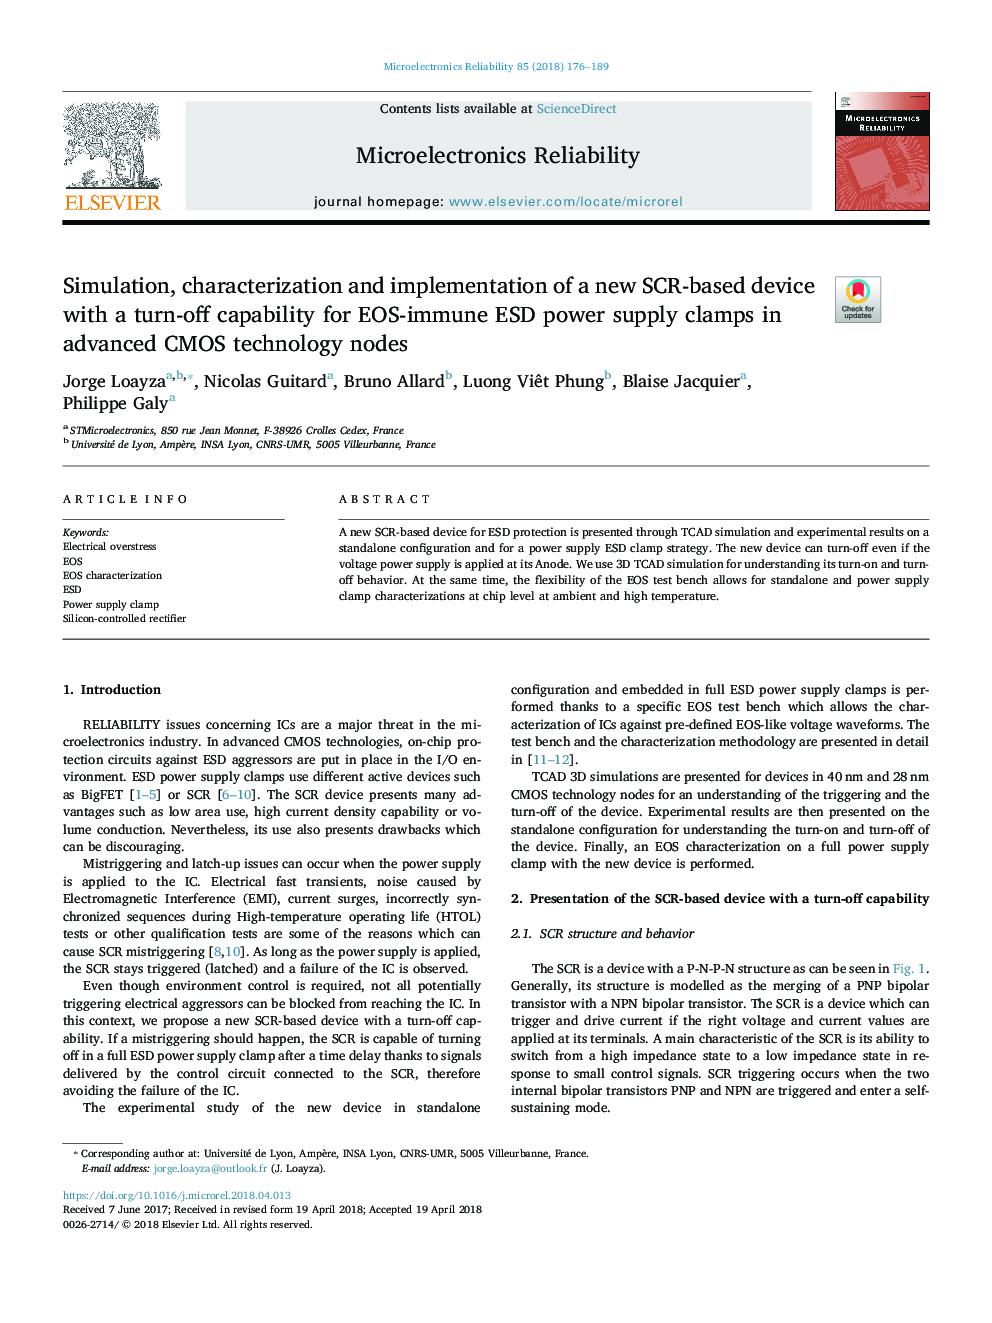 Simulation, characterization and implementation of a new SCR-based device with a turn-off capability for EOS-immune ESD power supply clamps in advanced CMOS technology nodes